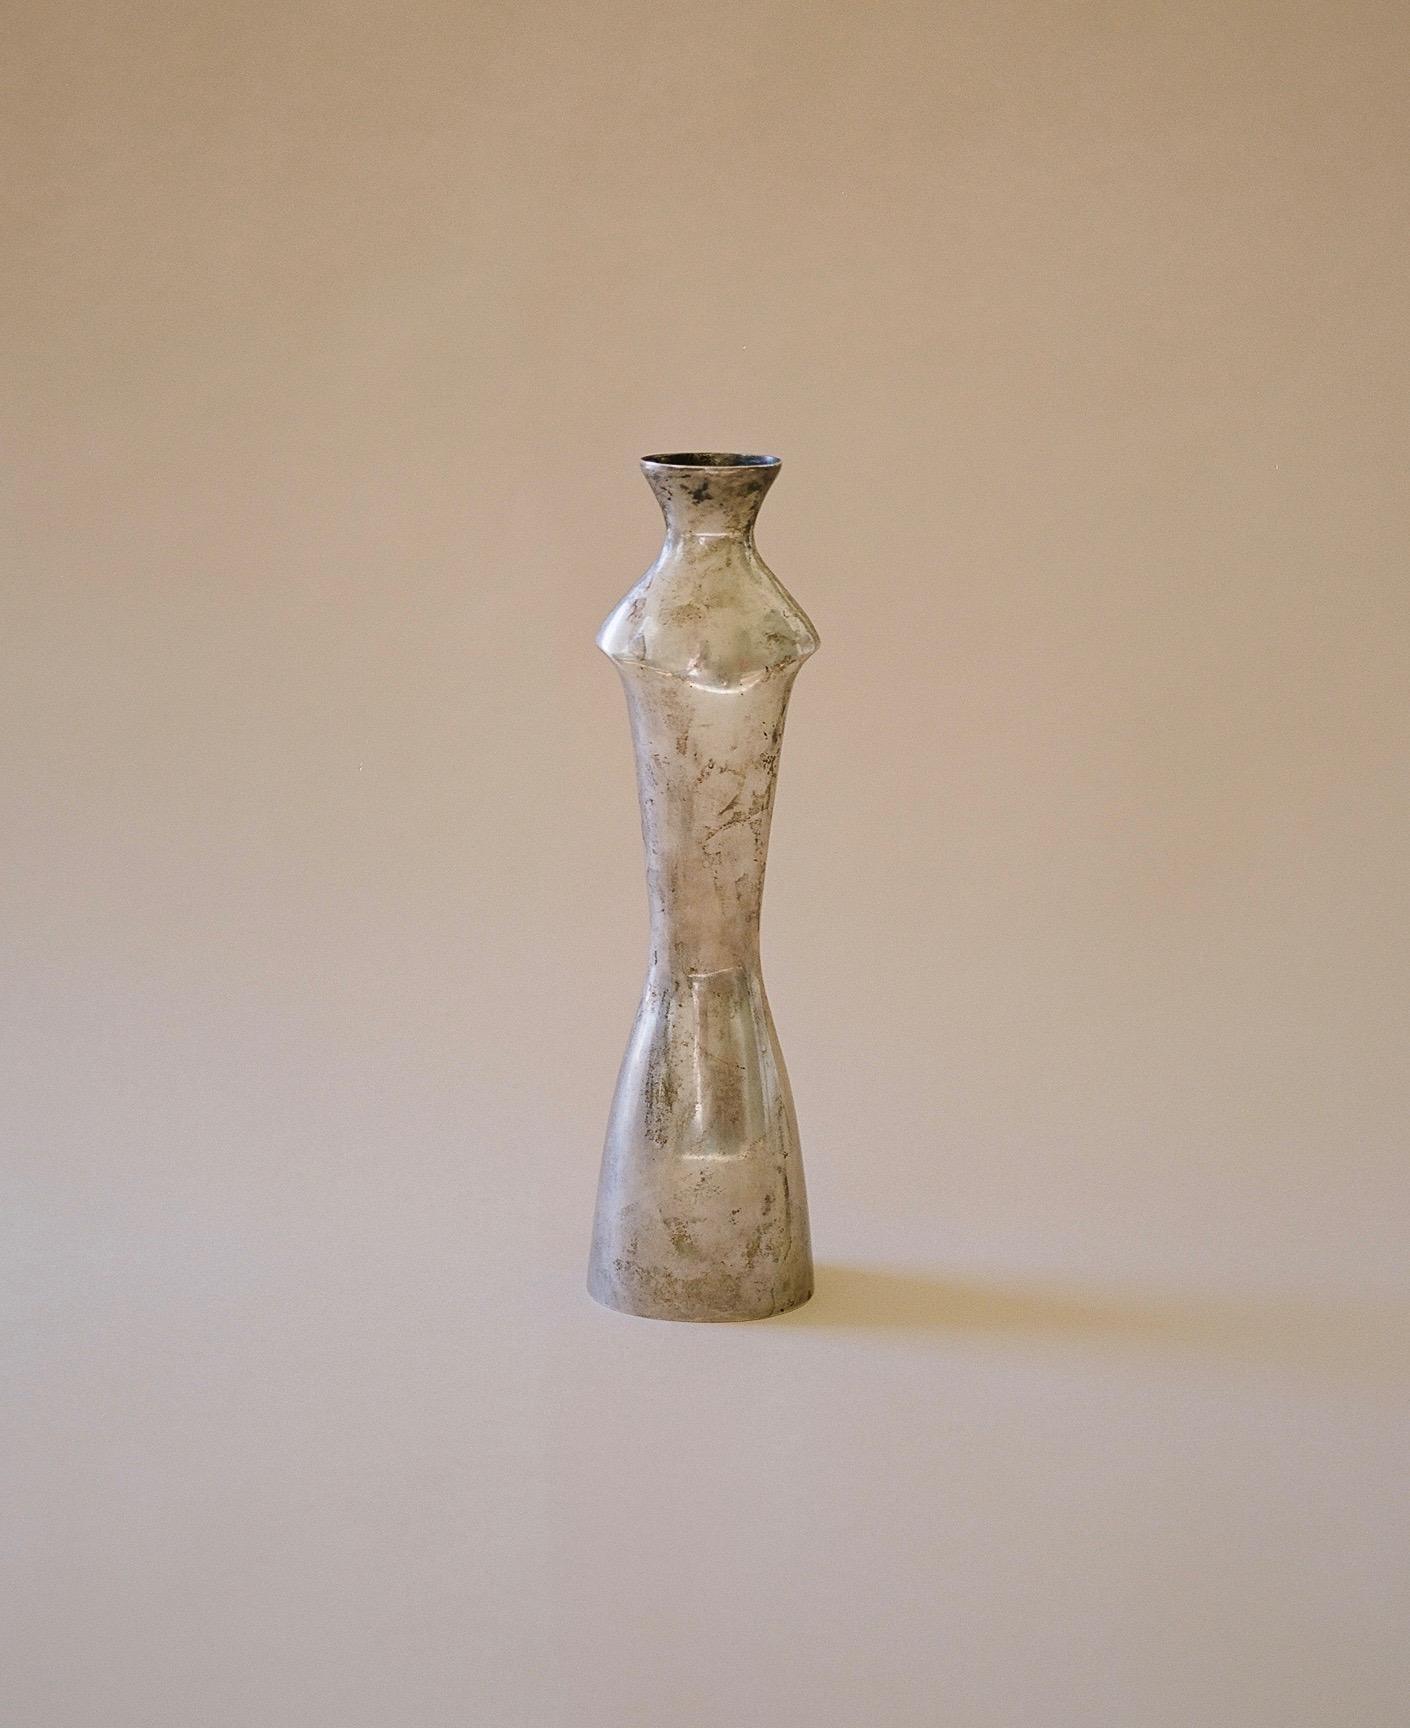 An Italian sterling silver vase in the form of a modernist torso. Marked Fabbrica Genazzi. Luigi Genazzi (1876-1946) began work as a silversmith in the 1920s gaining enough success to eventually open his own factory in Milan. There, Genazzi designed